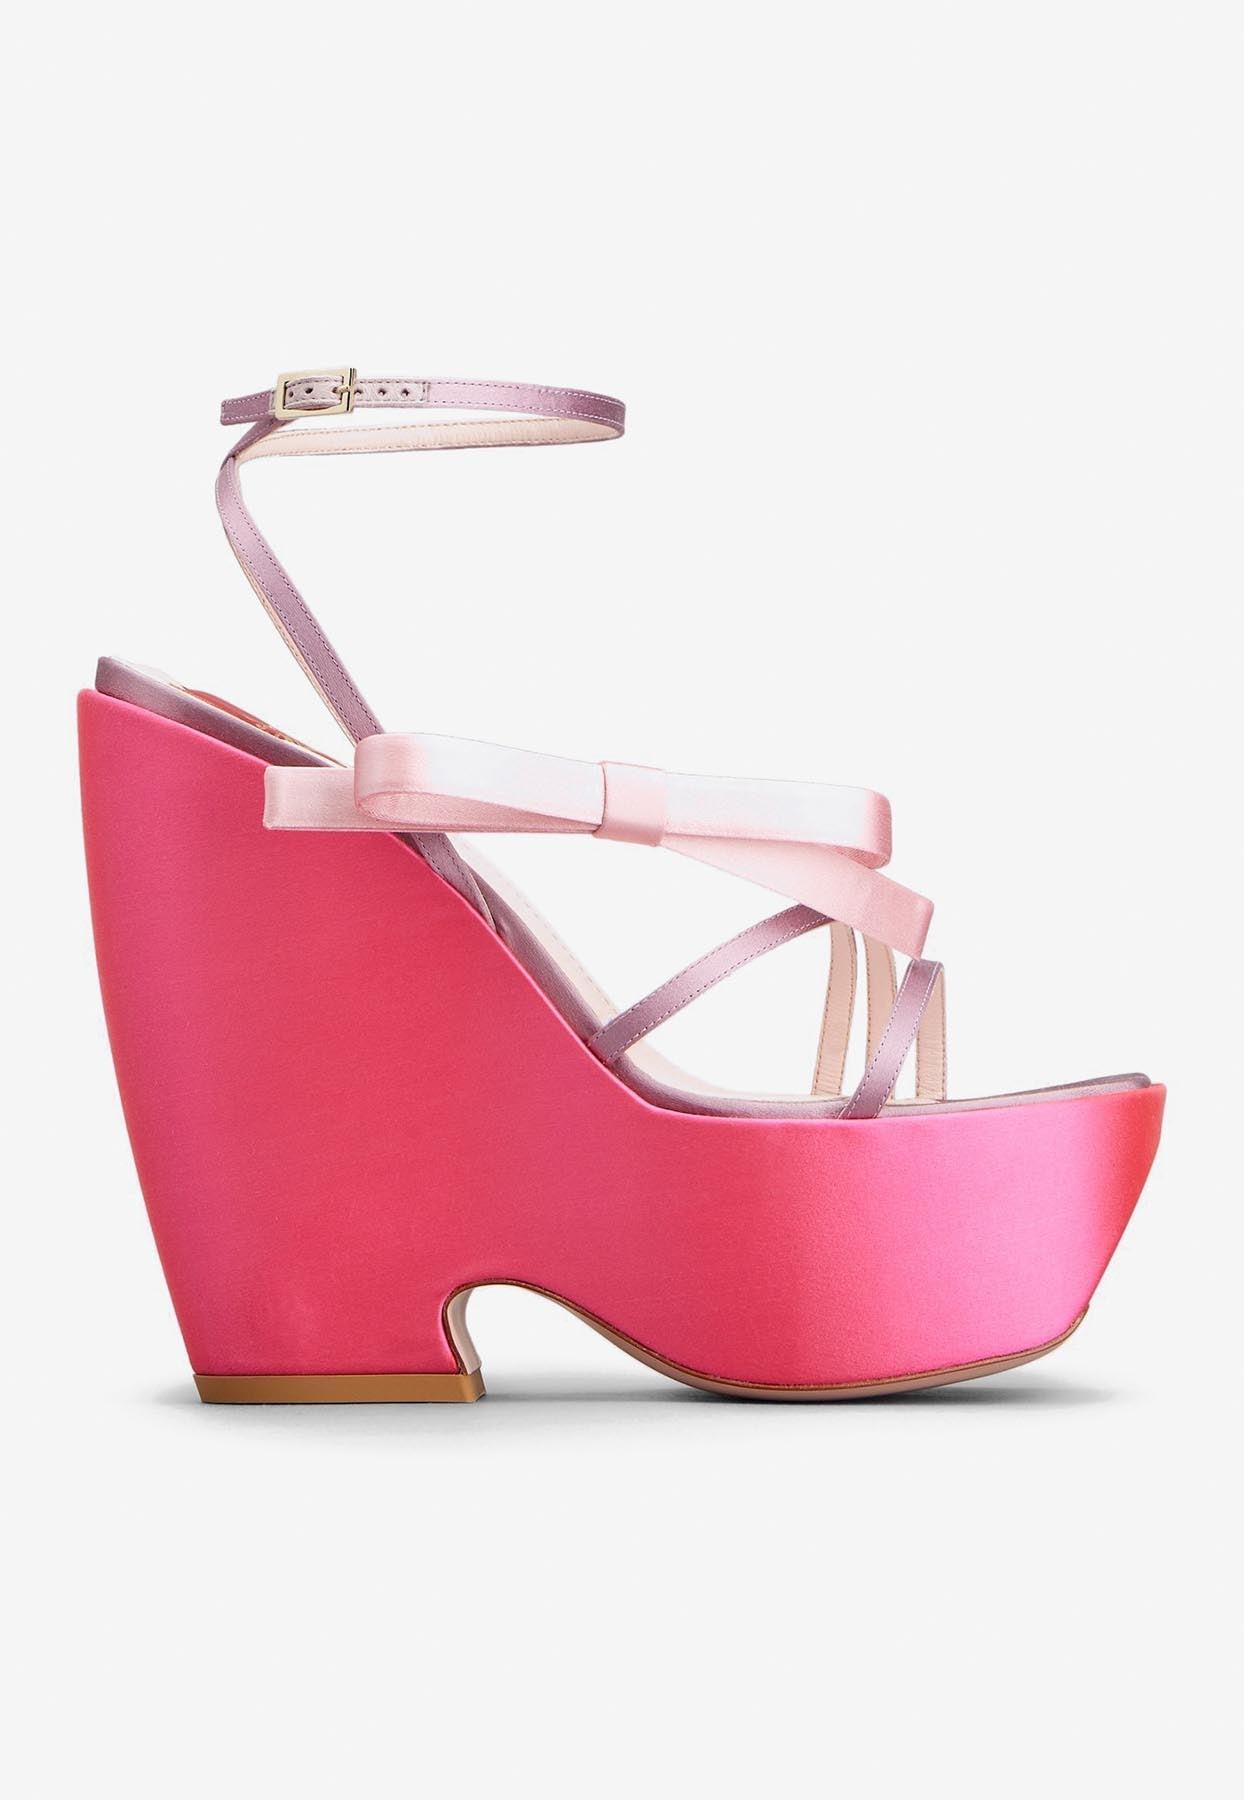 Roger Vivier Choc Bow 140 Wedge Sandals In Satin In Pink Lyst 